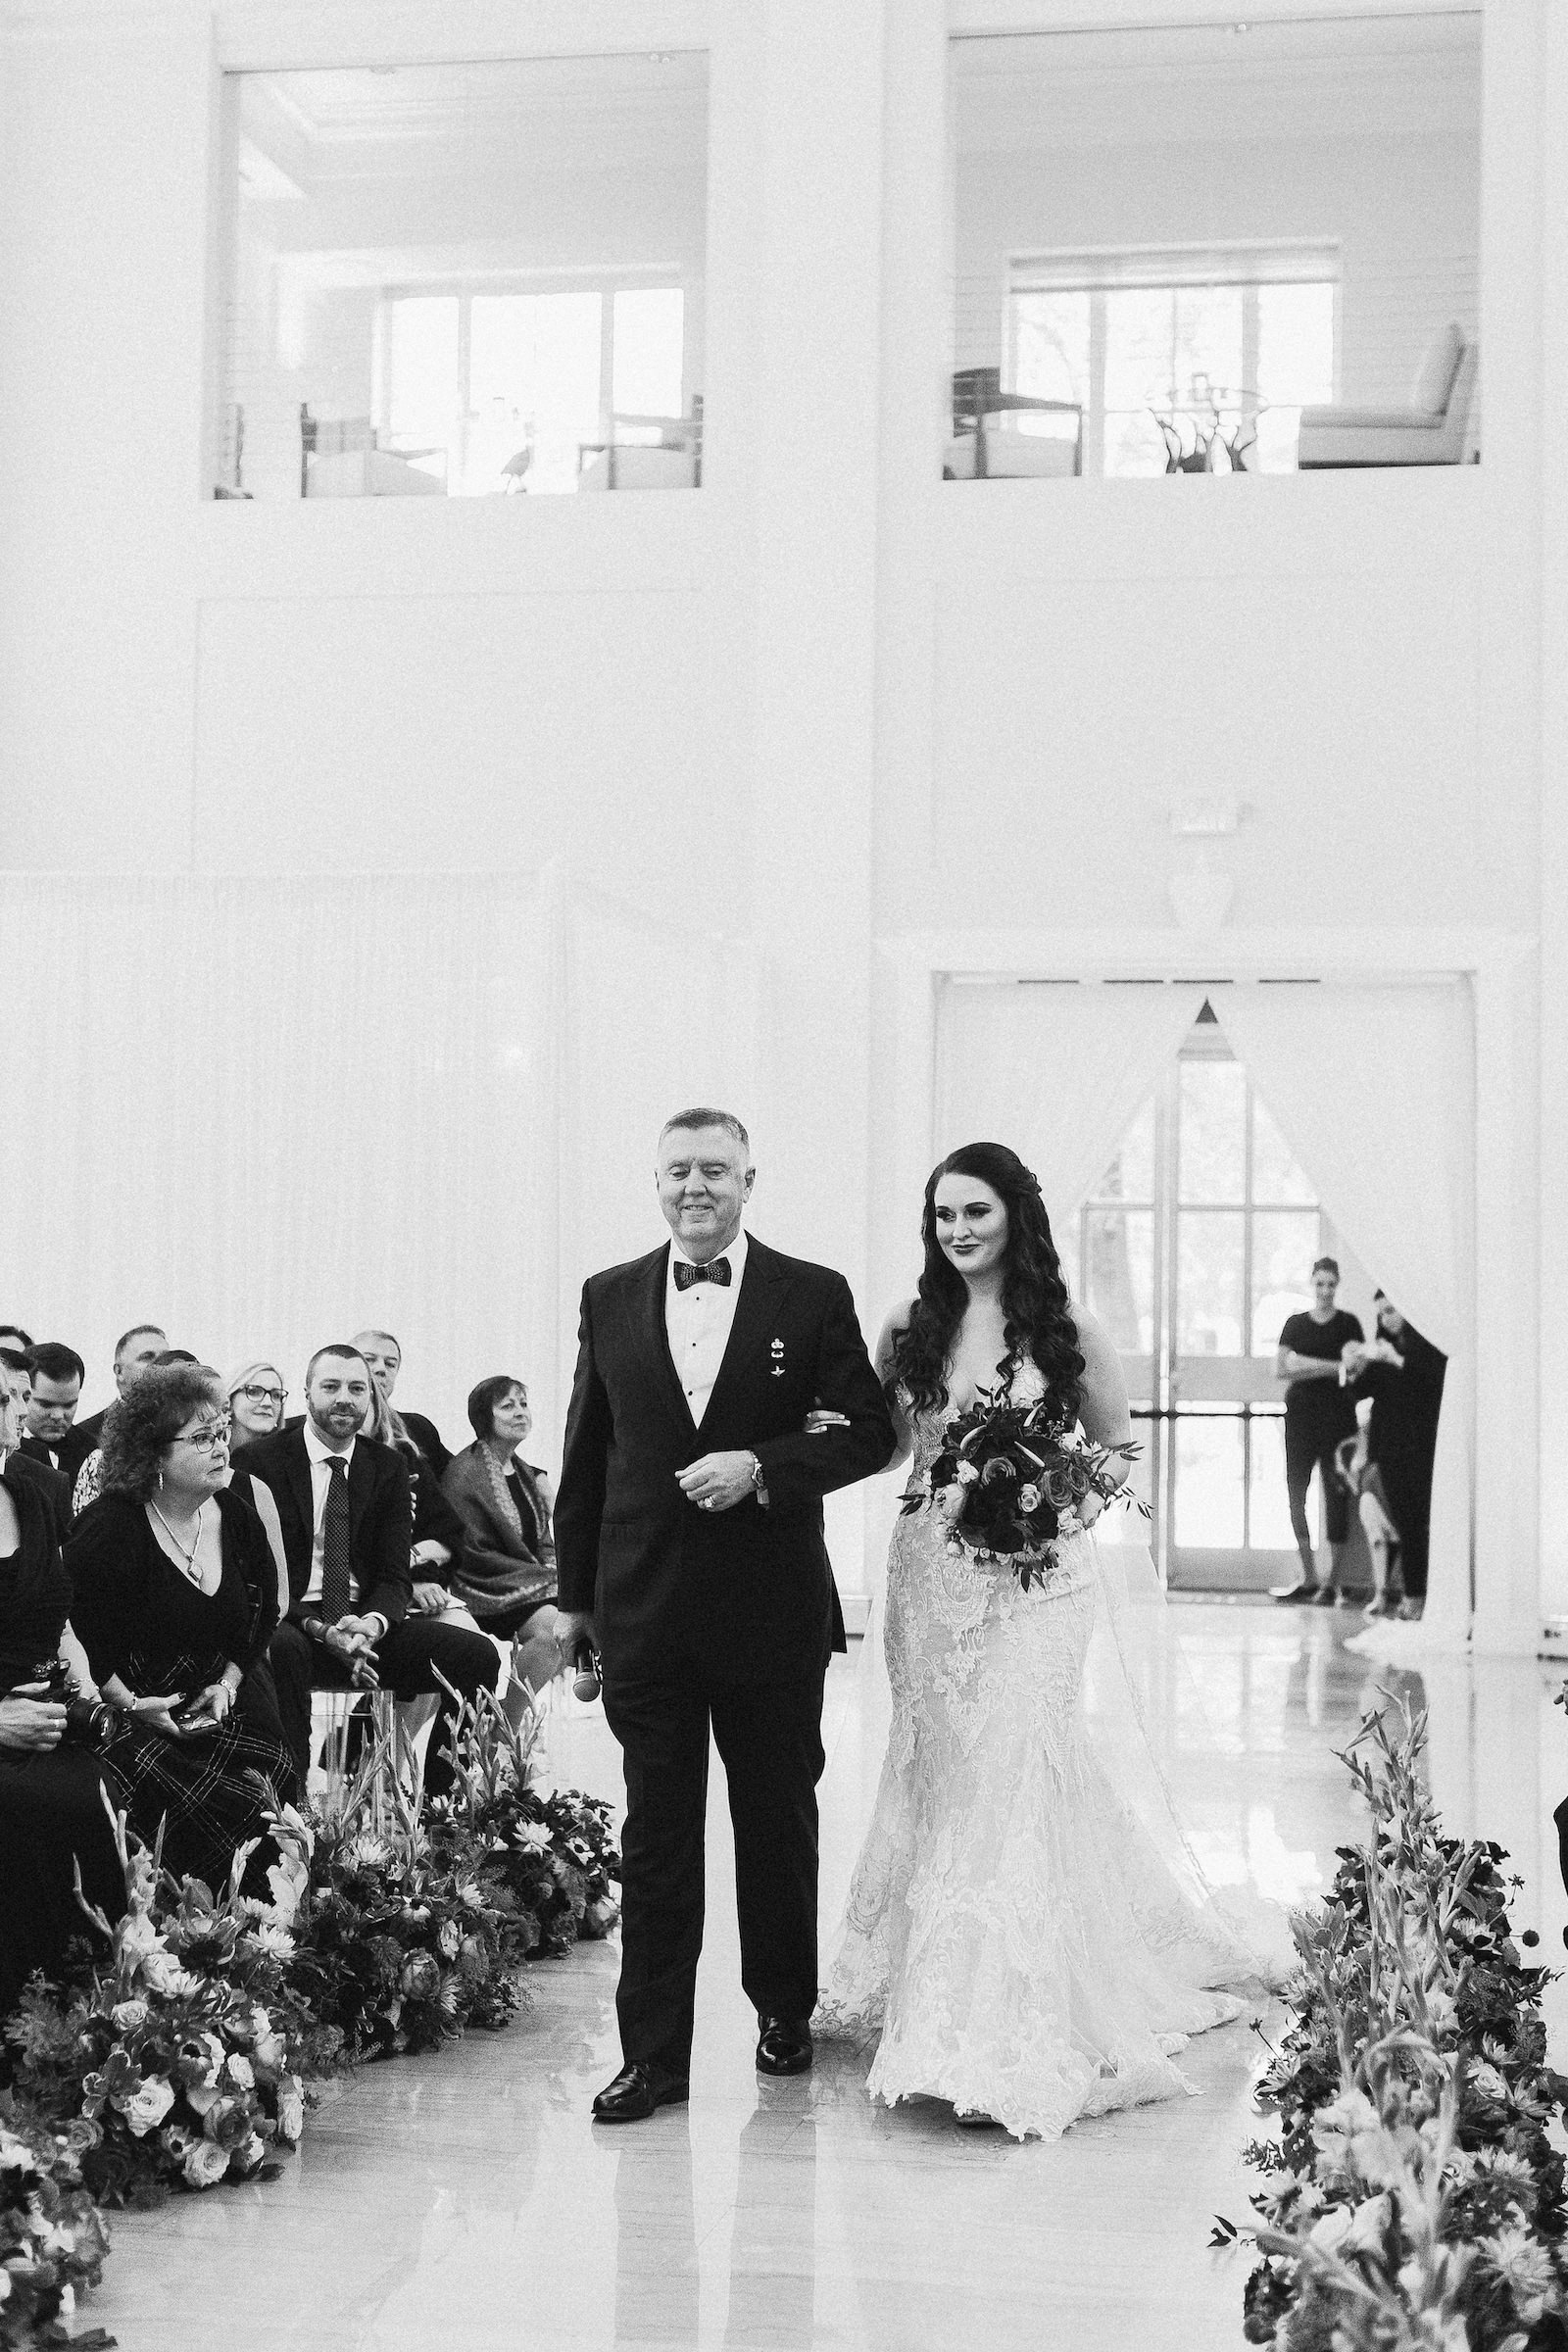 Indoor Downtown Tampa Wedding Ceremony at Tampa Wedding Venue The Vault | Bride Walking Down Aisle with Father | Black and White Wedding Photography